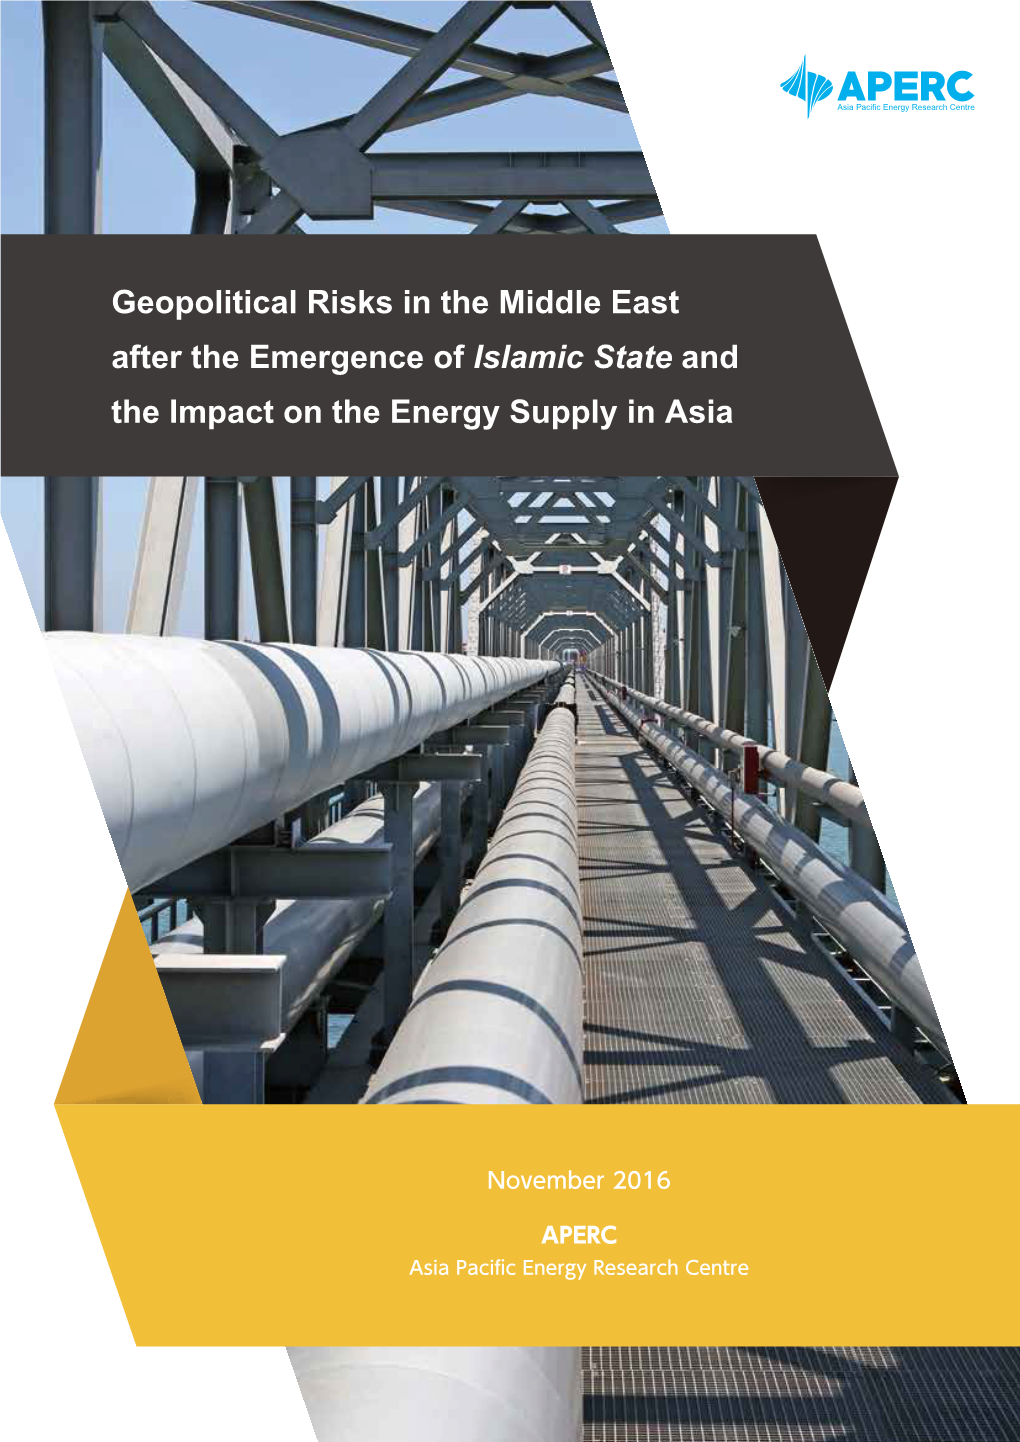 Geopolitical Risks in the Middle East After the Emergence of Islamic State and the Impact on the Energy Supply in Asia